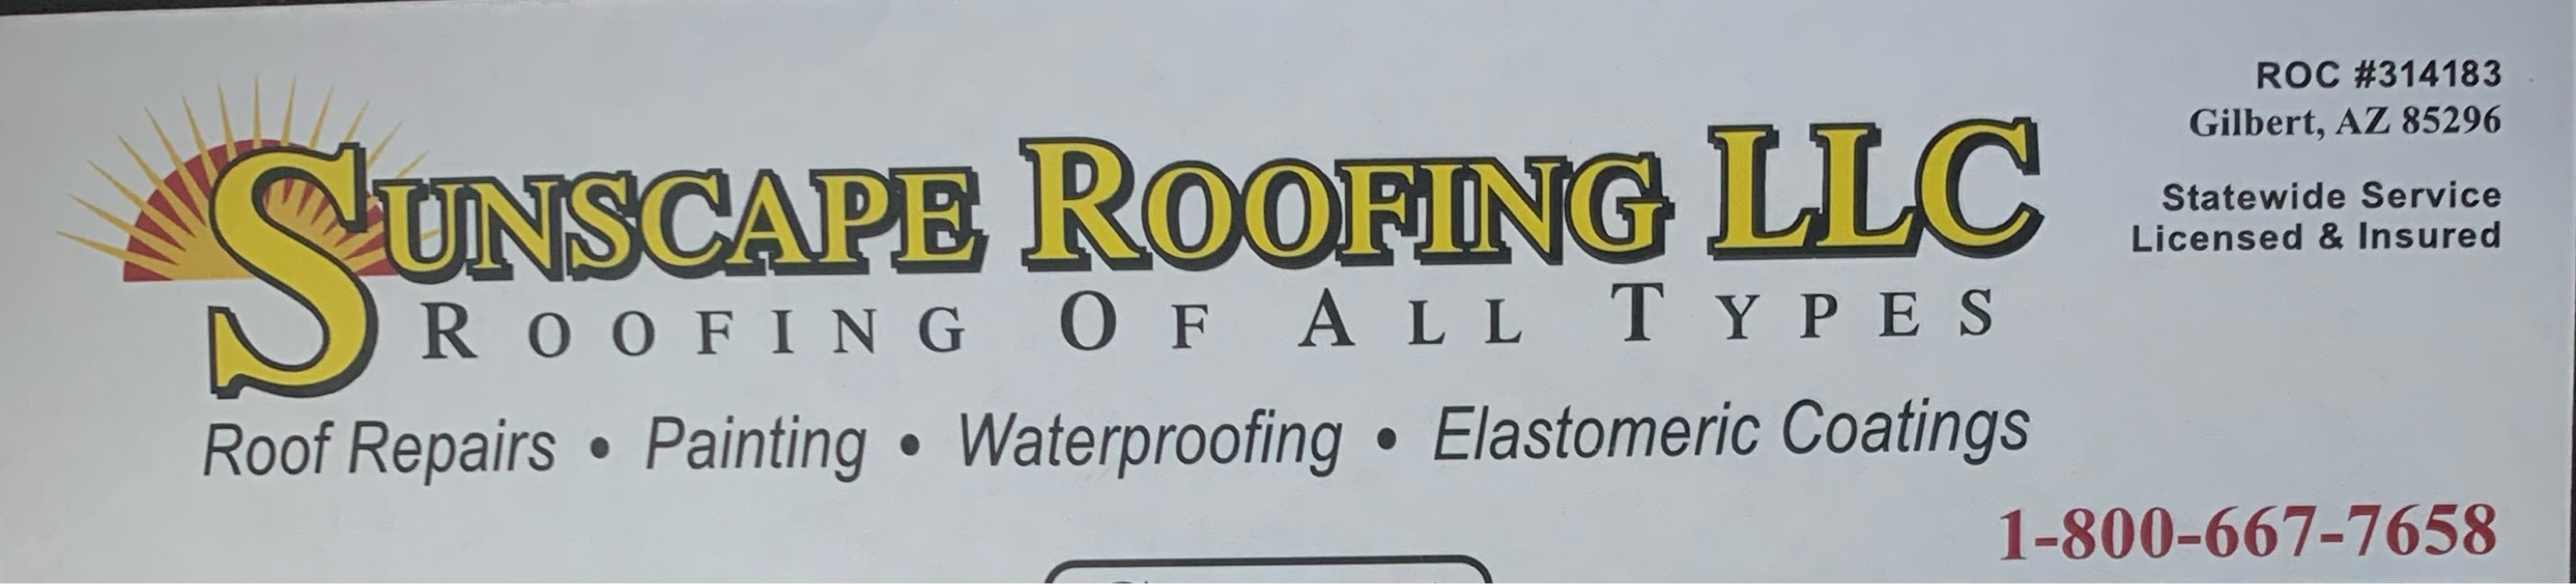 Sunscape Roofing Logo